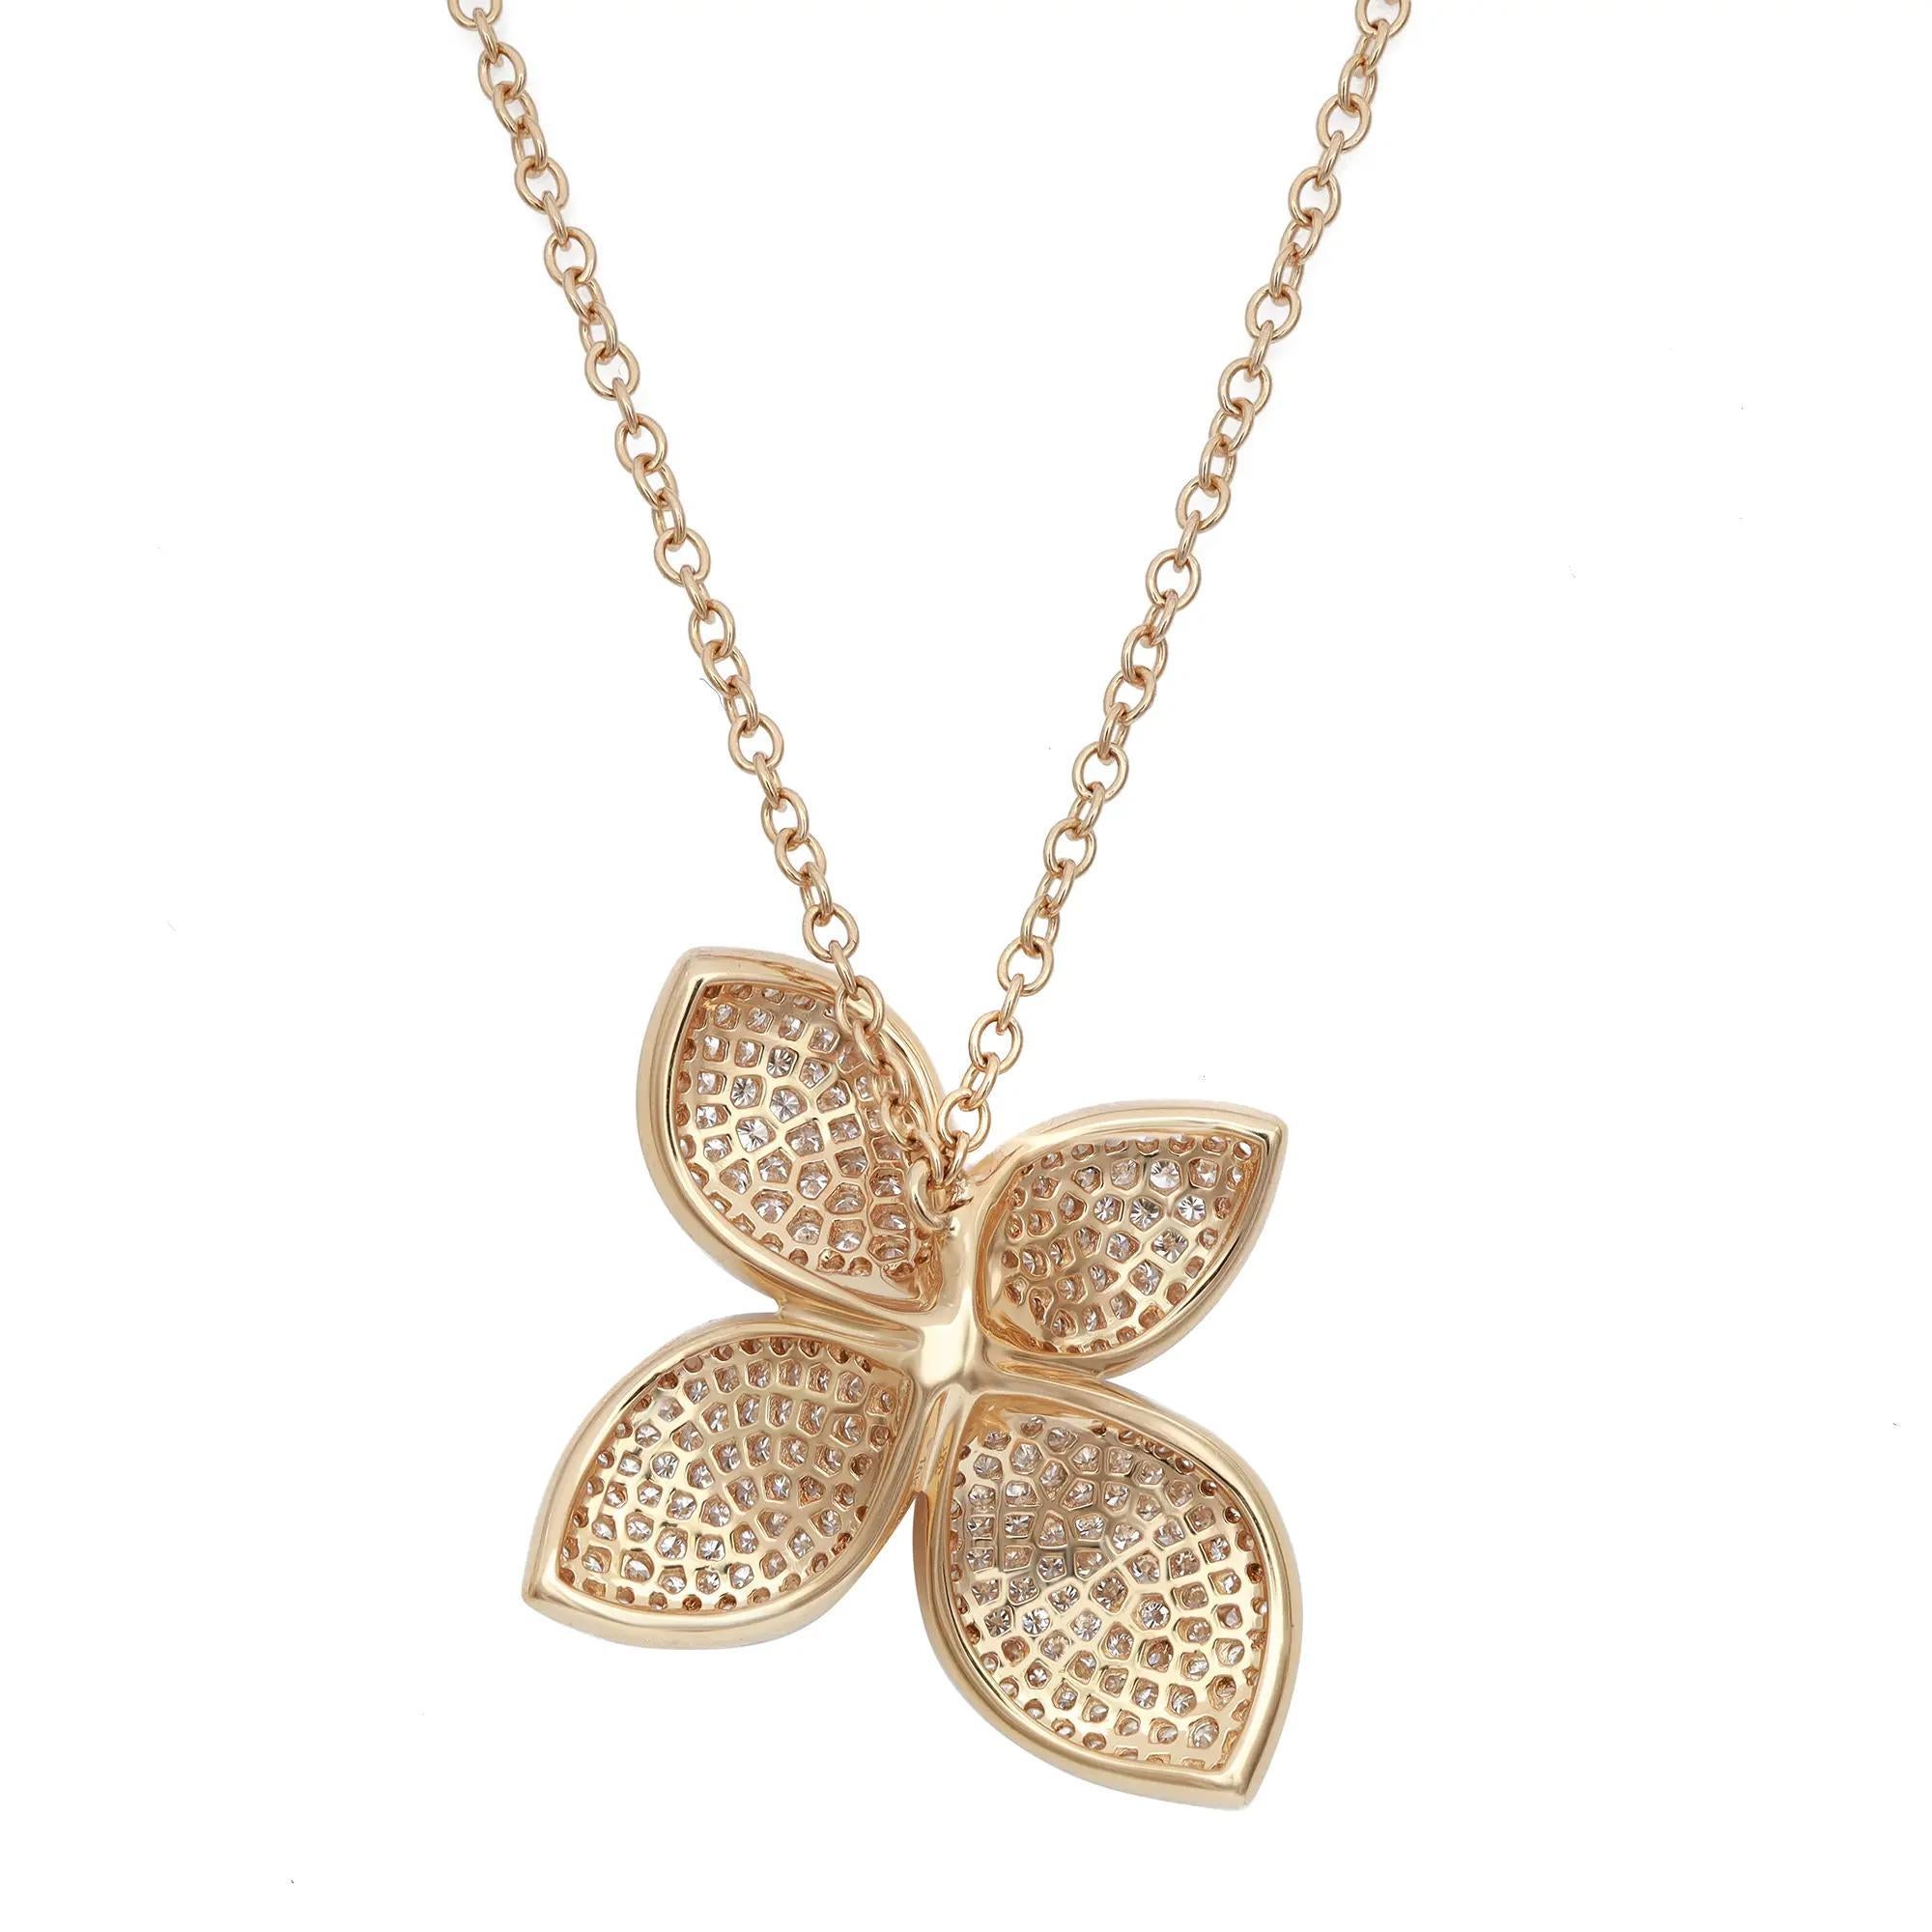 Pave Set Round Cut Diamond Flower Pendant Necklace 18K Yellow Gold 1.07Cttw In New Condition For Sale In New York, NY